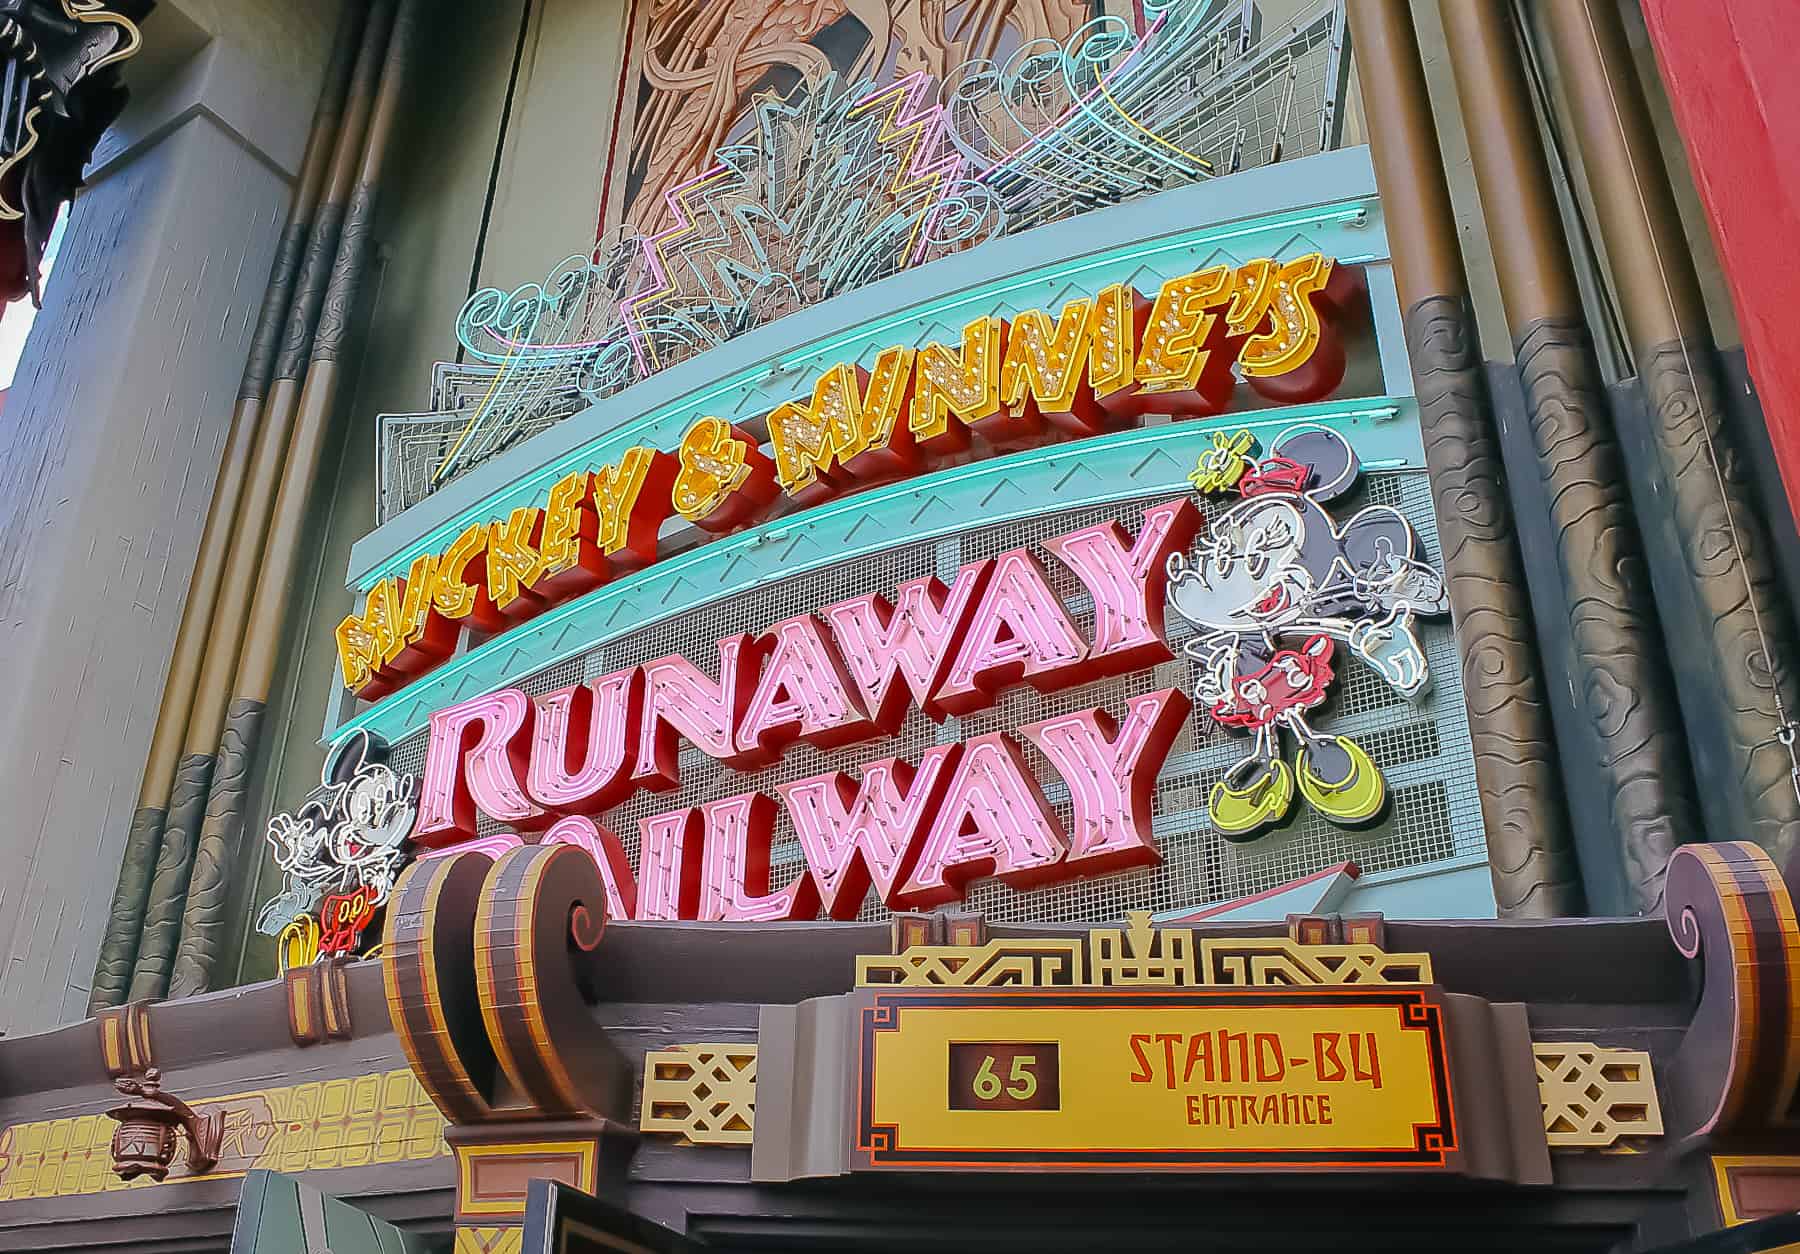 The neon light attraction sign for Mickey & Minnie's Runaway Railway 